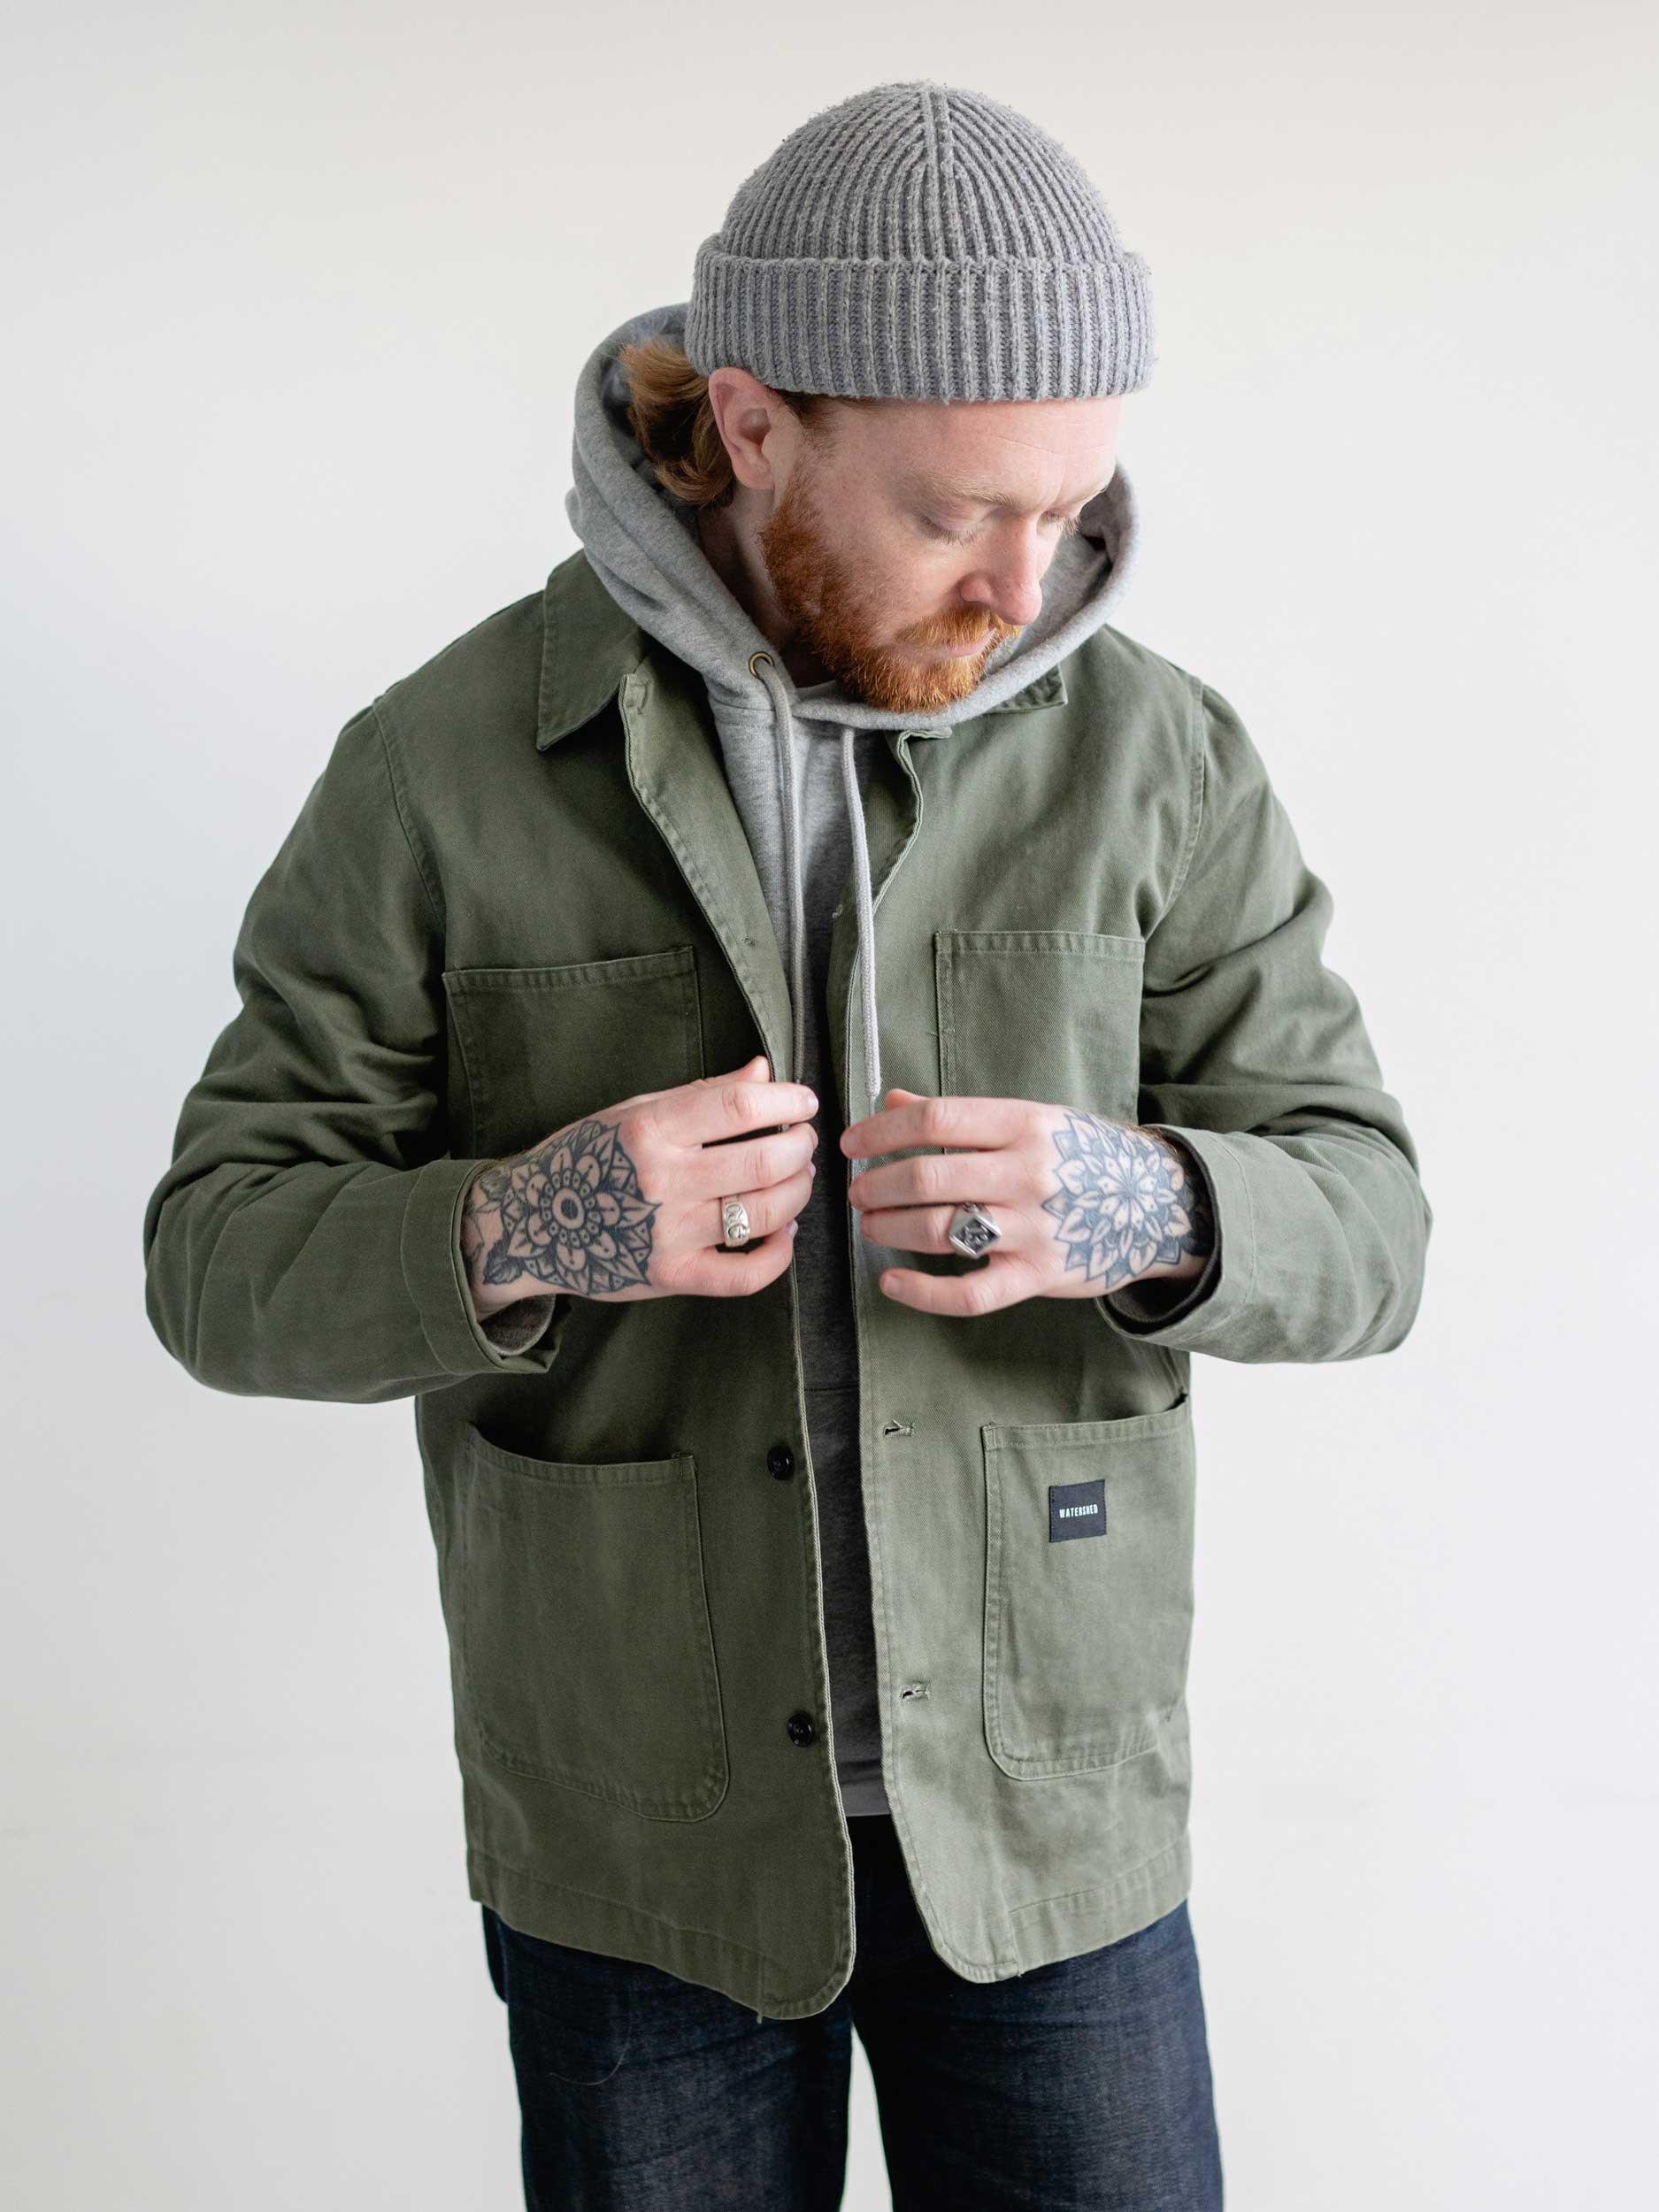 Slater Chore Jacket - Military Green - Watershed Brand